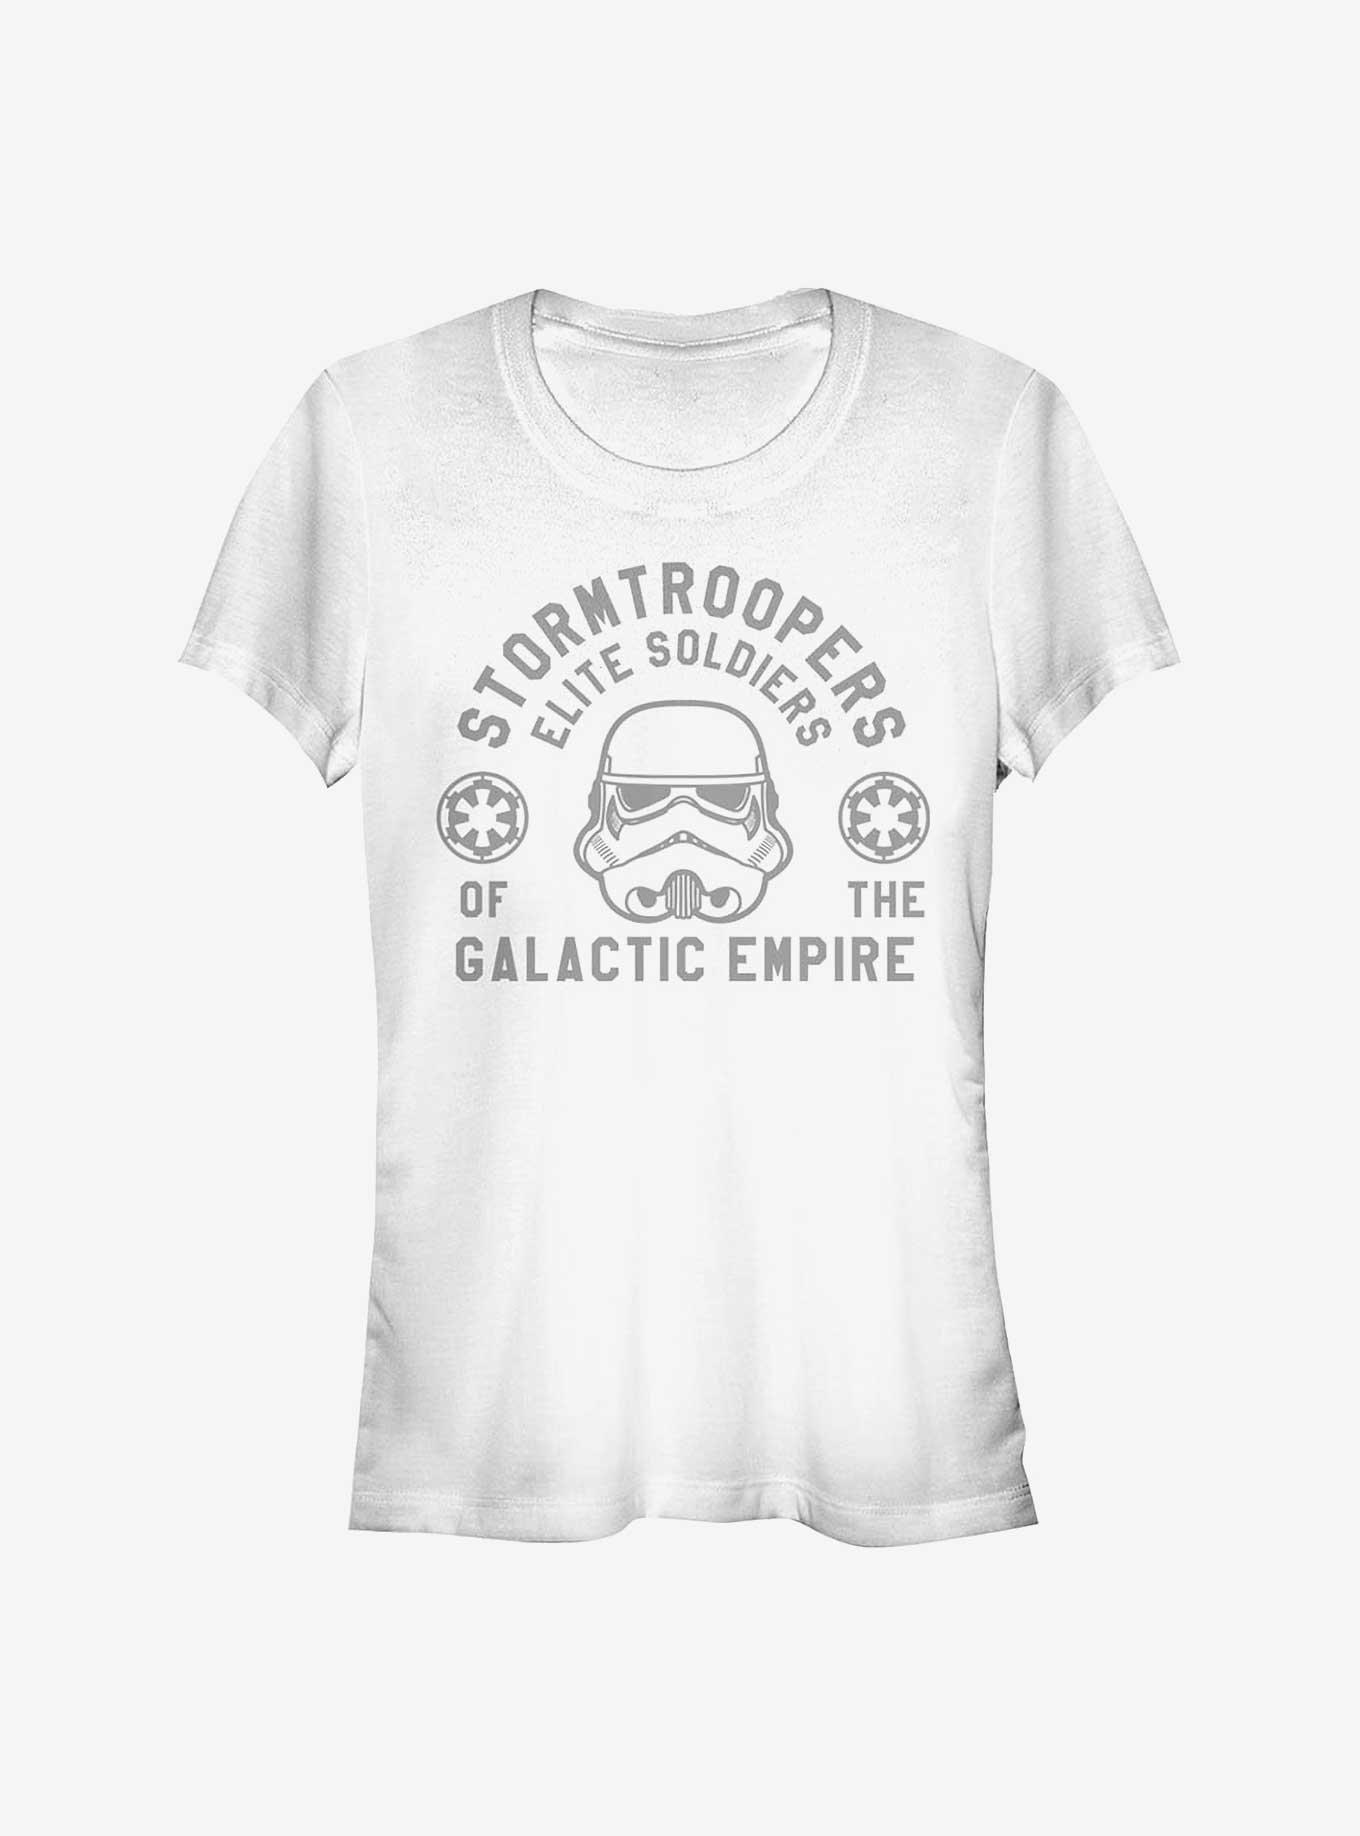 Star Wars Rogue One: A Star Wars Story Elite Troop Girls T-Shirt, WHITE, hi-res